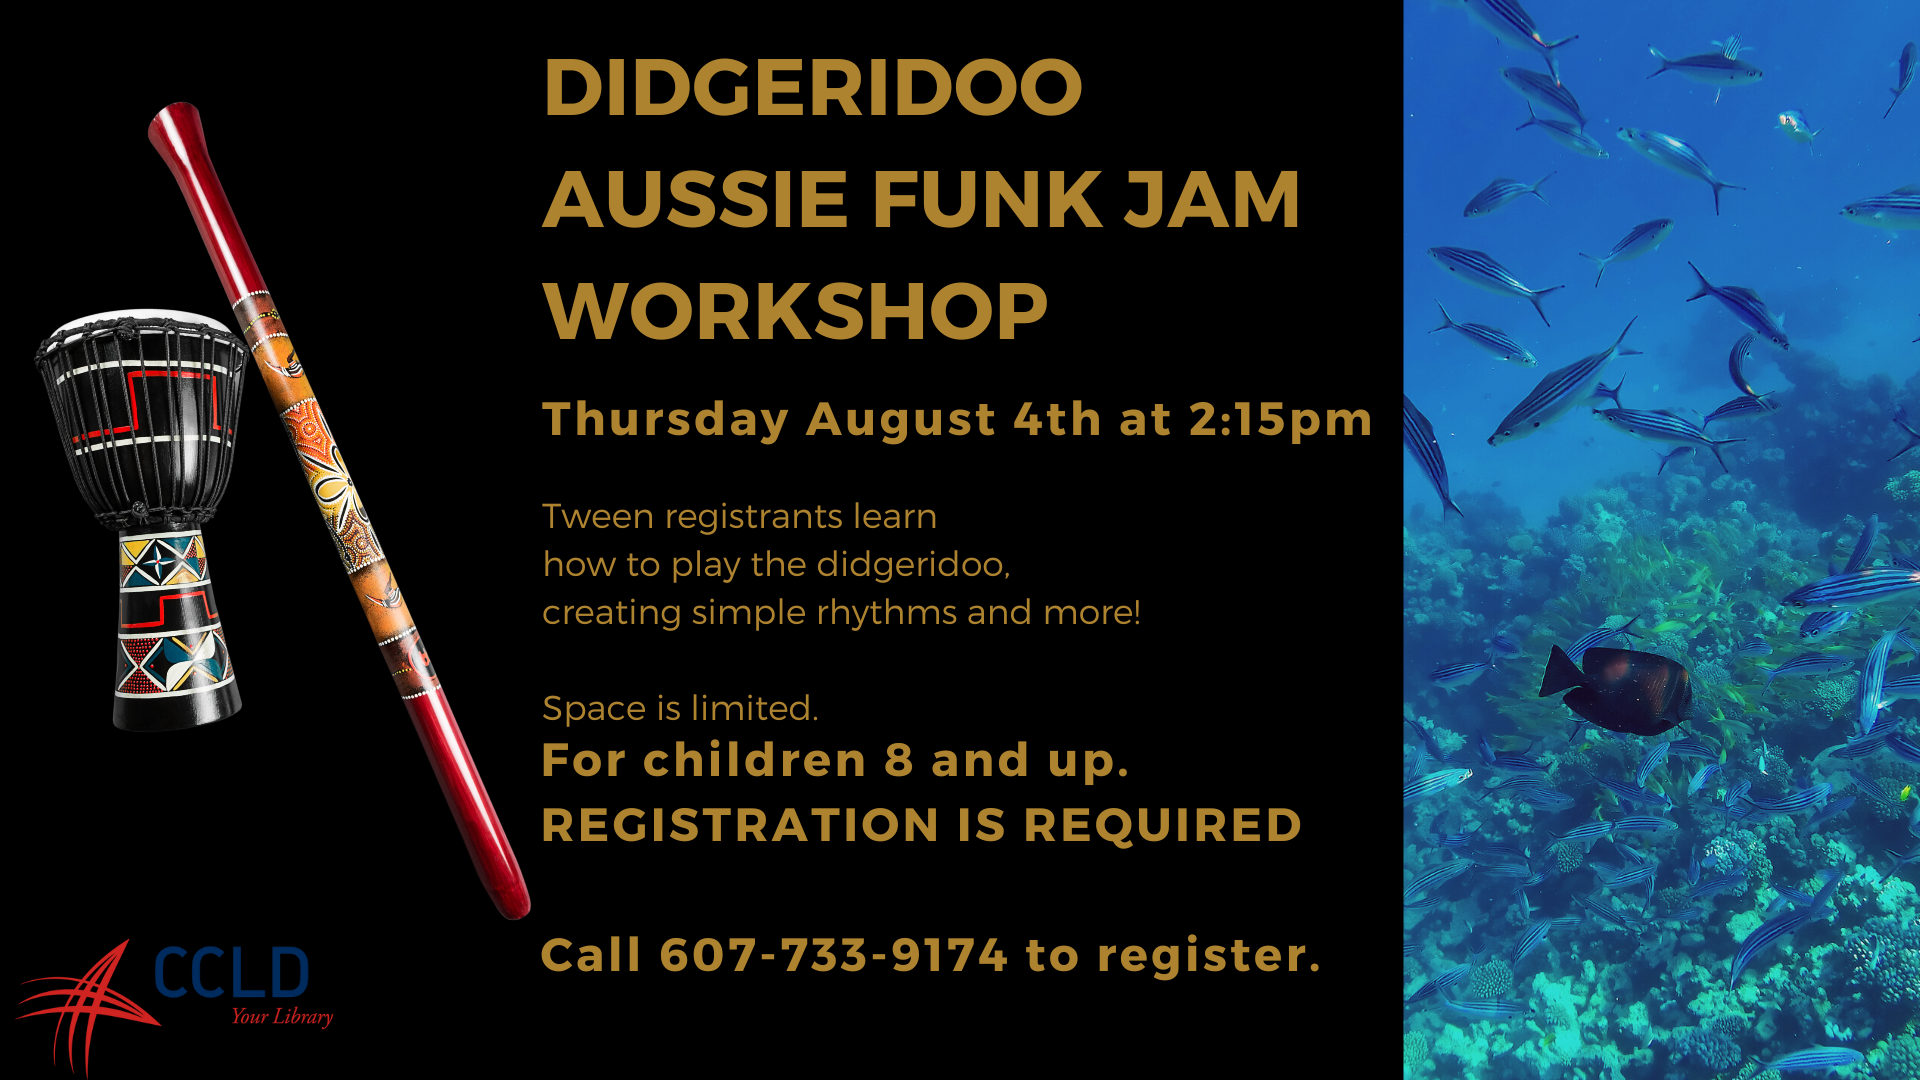 DIDGERIDOO AUSSIE FUNK JAM WORKSHOP
Thursday August 4th at 2:15pm

Tween registrants learn 
how to play the didgeridoo, 
creating simple rhythms and more!

Space is limited.

For children 8 and up.
REGISTRATION IS REQUIRED

Call 607-733-9174 to register.